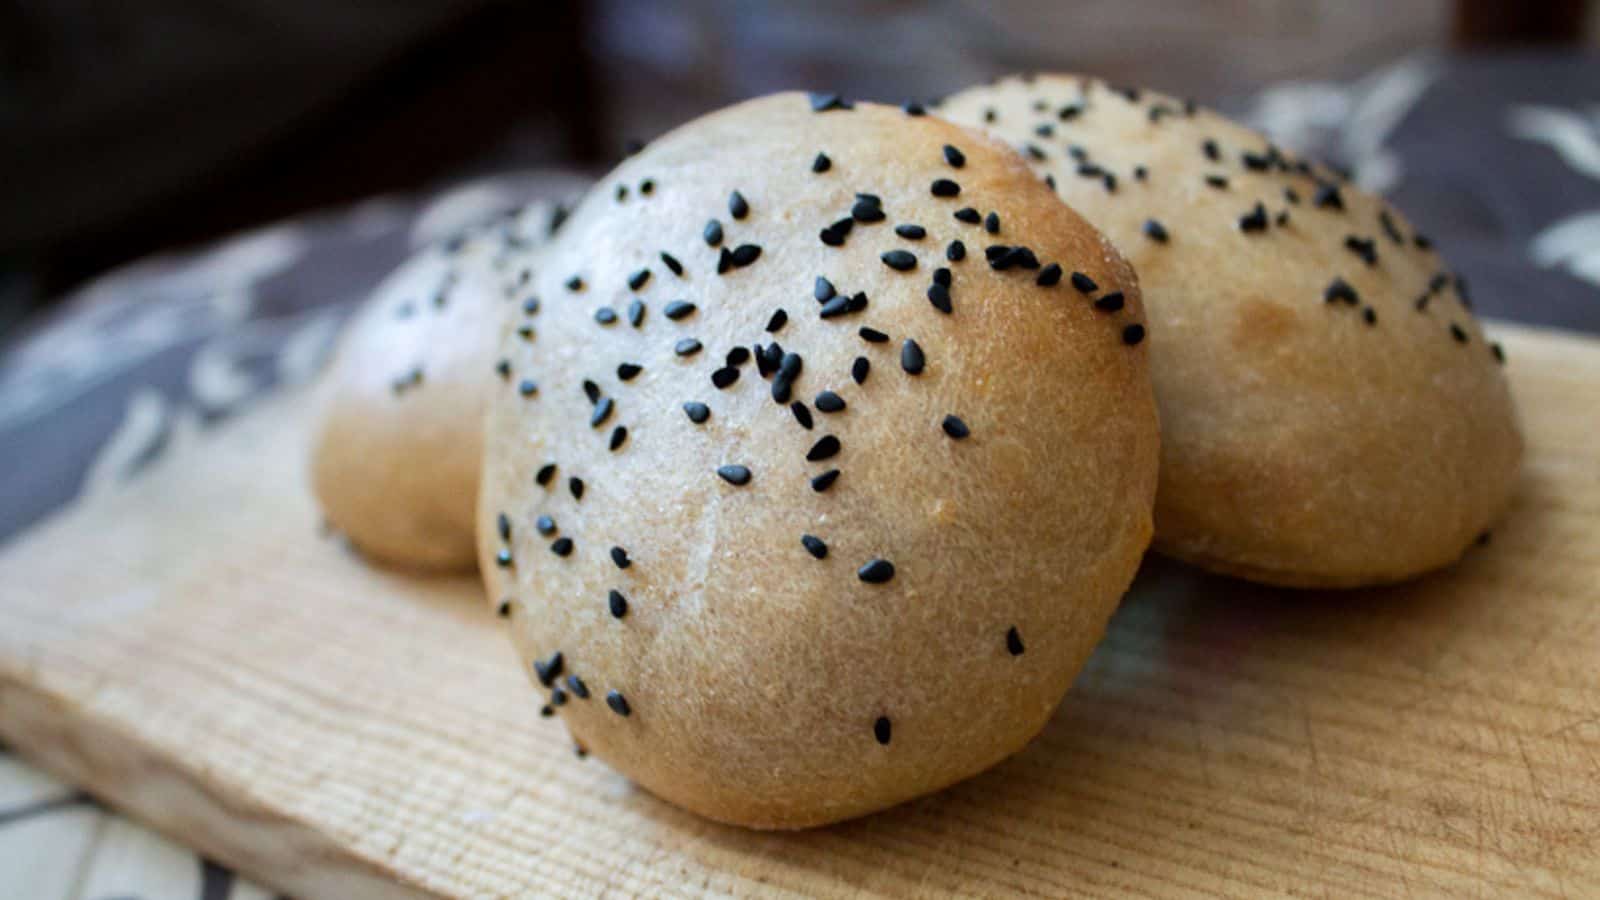 Sesame buns with sesame seeds on a wooden cutting board.